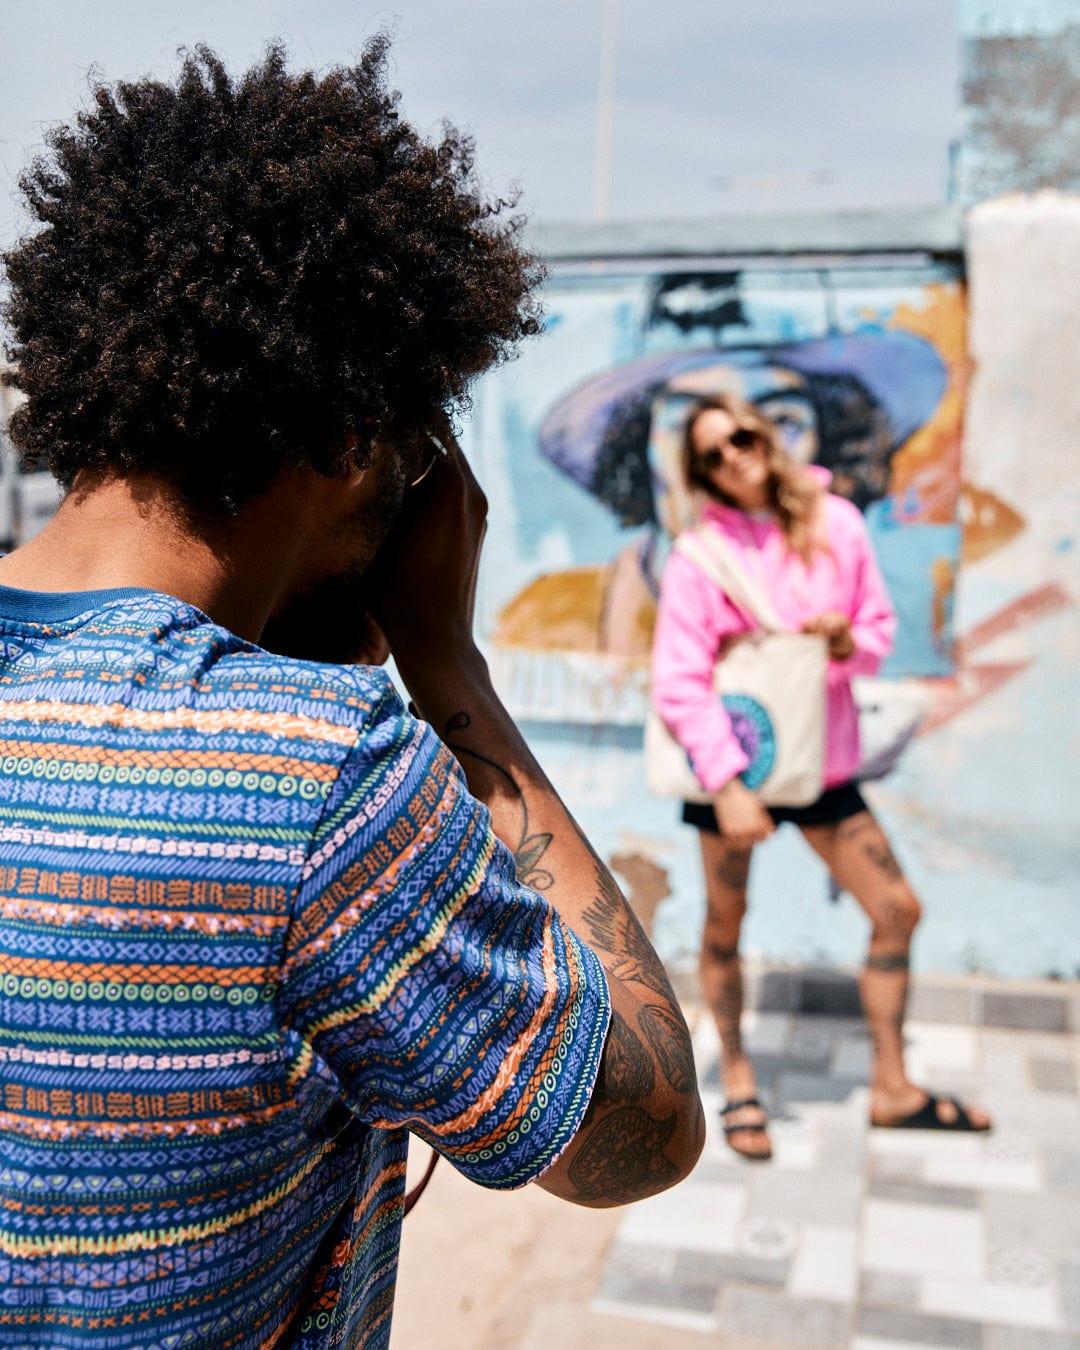 A man takes a photo of a woman posing in front of a vibrant street mural; she is smiling and holding a hat with Aztec print, and wearing the Saltrock Marks Men's Short Sleeve T-Shirt in Purple.